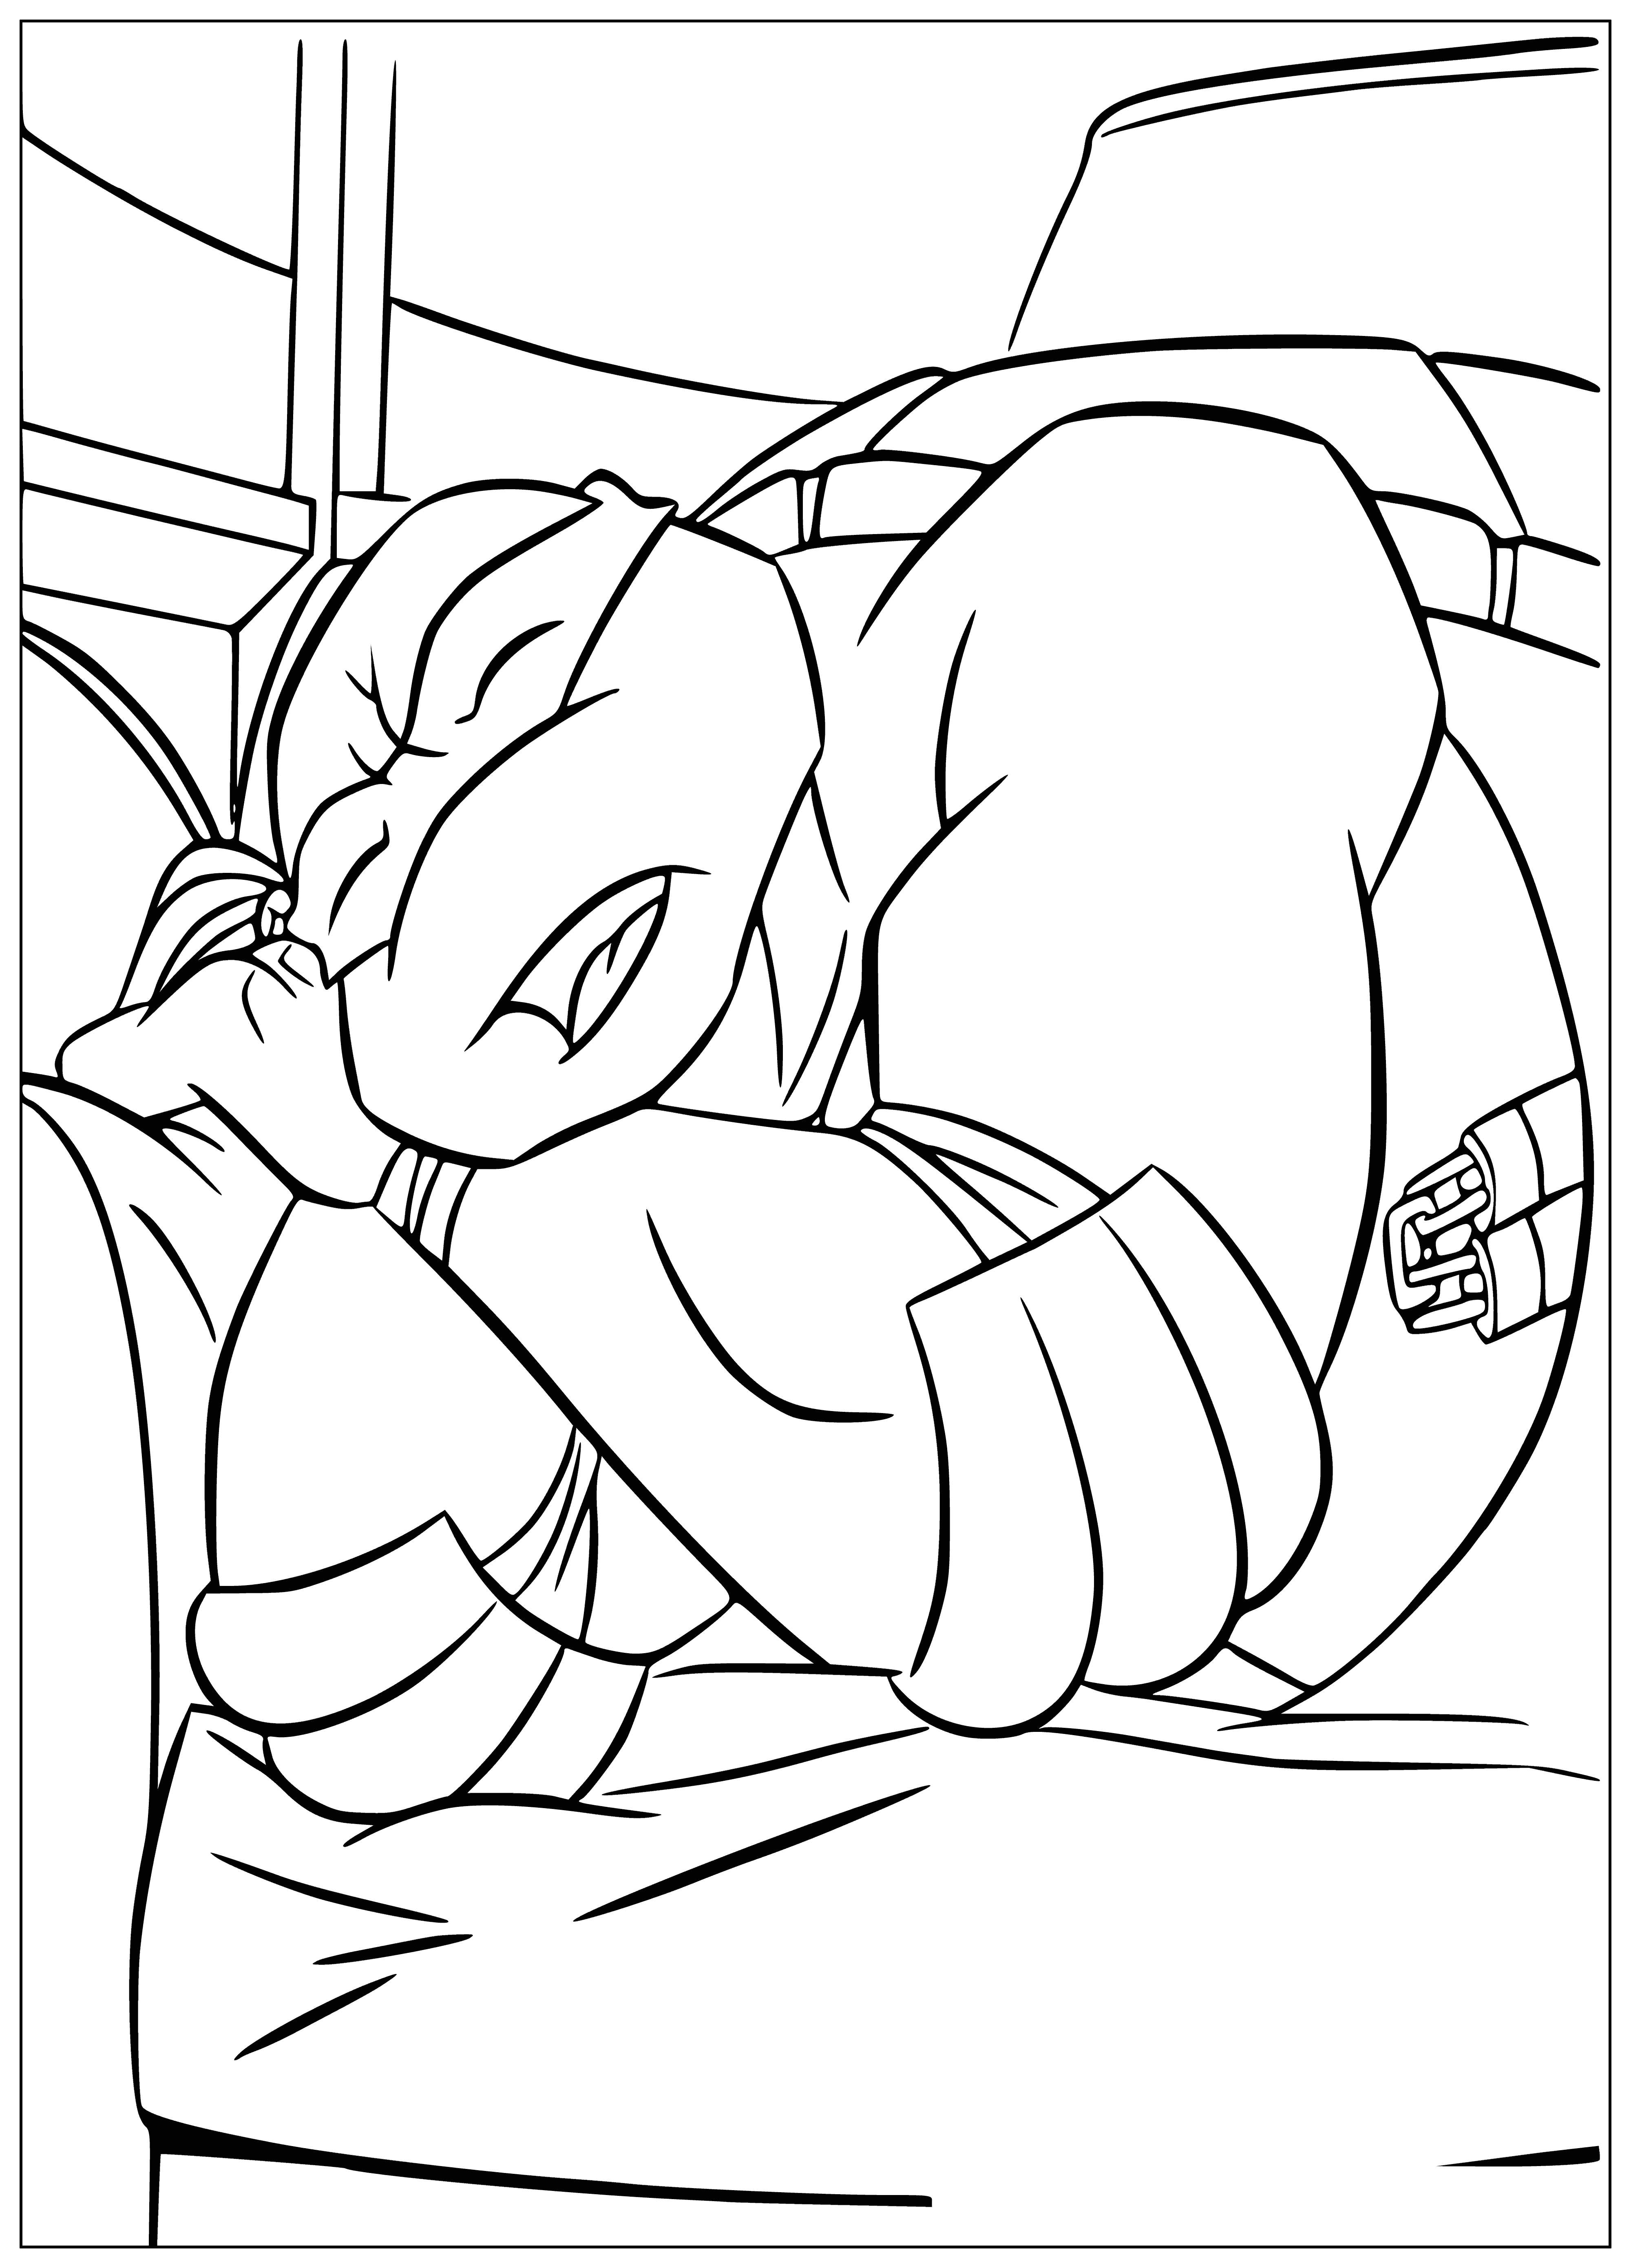 Raphael is sleeping coloring page